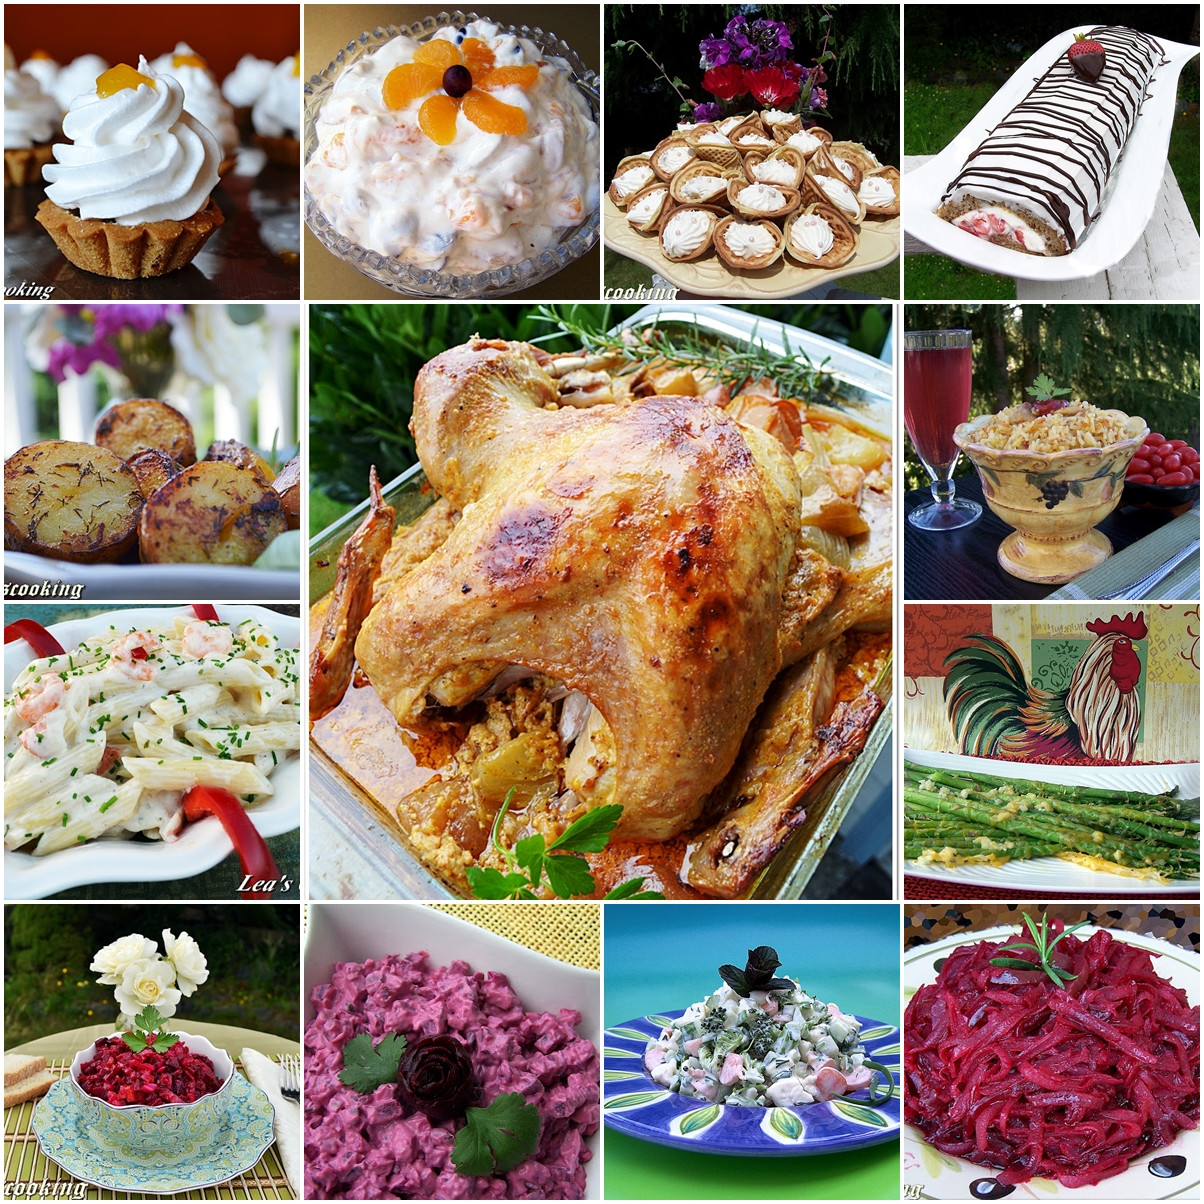 Dinner Party Meal Ideas
 Lea s Cooking "Thanksgiving Dinner Party Ideas"